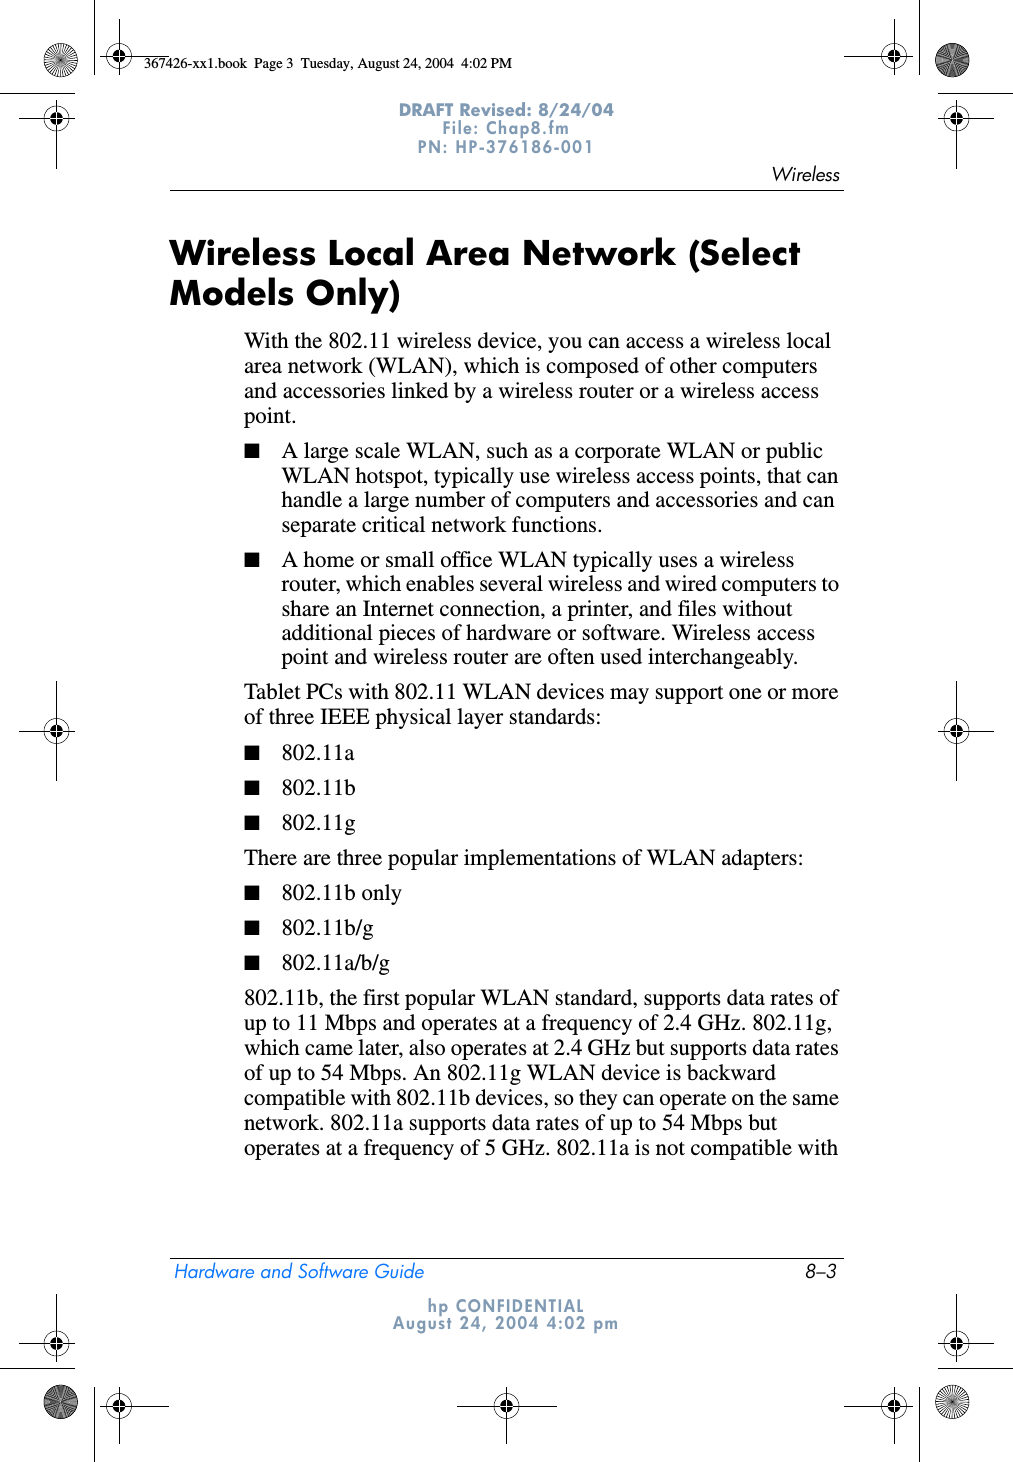 WirelessHardware and Software Guide 8–3DRAFT Revised: 8/24/04File: Chap8.fm PN: HP-376186-001 hp CONFIDENTIALAugust 24, 2004 4:02 pmWireless Local Area Network (Select Models Only)With the 802.11 wireless device, you can access a wireless local area network (WLAN), which is composed of other computers and accessories linked by a wireless router or a wireless access point. ■A large scale WLAN, such as a corporate WLAN or public WLAN hotspot, typically use wireless access points, that can handle a large number of computers and accessories and can separate critical network functions. ■A home or small office WLAN typically uses a wireless router, which enables several wireless and wired computers to share an Internet connection, a printer, and files without additional pieces of hardware or software. Wireless access point and wireless router are often used interchangeably. Tablet PCs with 802.11 WLAN devices may support one or more of three IEEE physical layer standards: ■802.11a■802.11b■802.11gThere are three popular implementations of WLAN adapters:■802.11b only■802.11b/g■802.11a/b/g802.11b, the first popular WLAN standard, supports data rates of up to 11 Mbps and operates at a frequency of 2.4 GHz. 802.11g, which came later, also operates at 2.4 GHz but supports data rates of up to 54 Mbps. An 802.11g WLAN device is backward compatible with 802.11b devices, so they can operate on the same network. 802.11a supports data rates of up to 54 Mbps but operates at a frequency of 5 GHz. 802.11a is not compatible with 367426-xx1.book  Page 3  Tuesday, August 24, 2004  4:02 PM